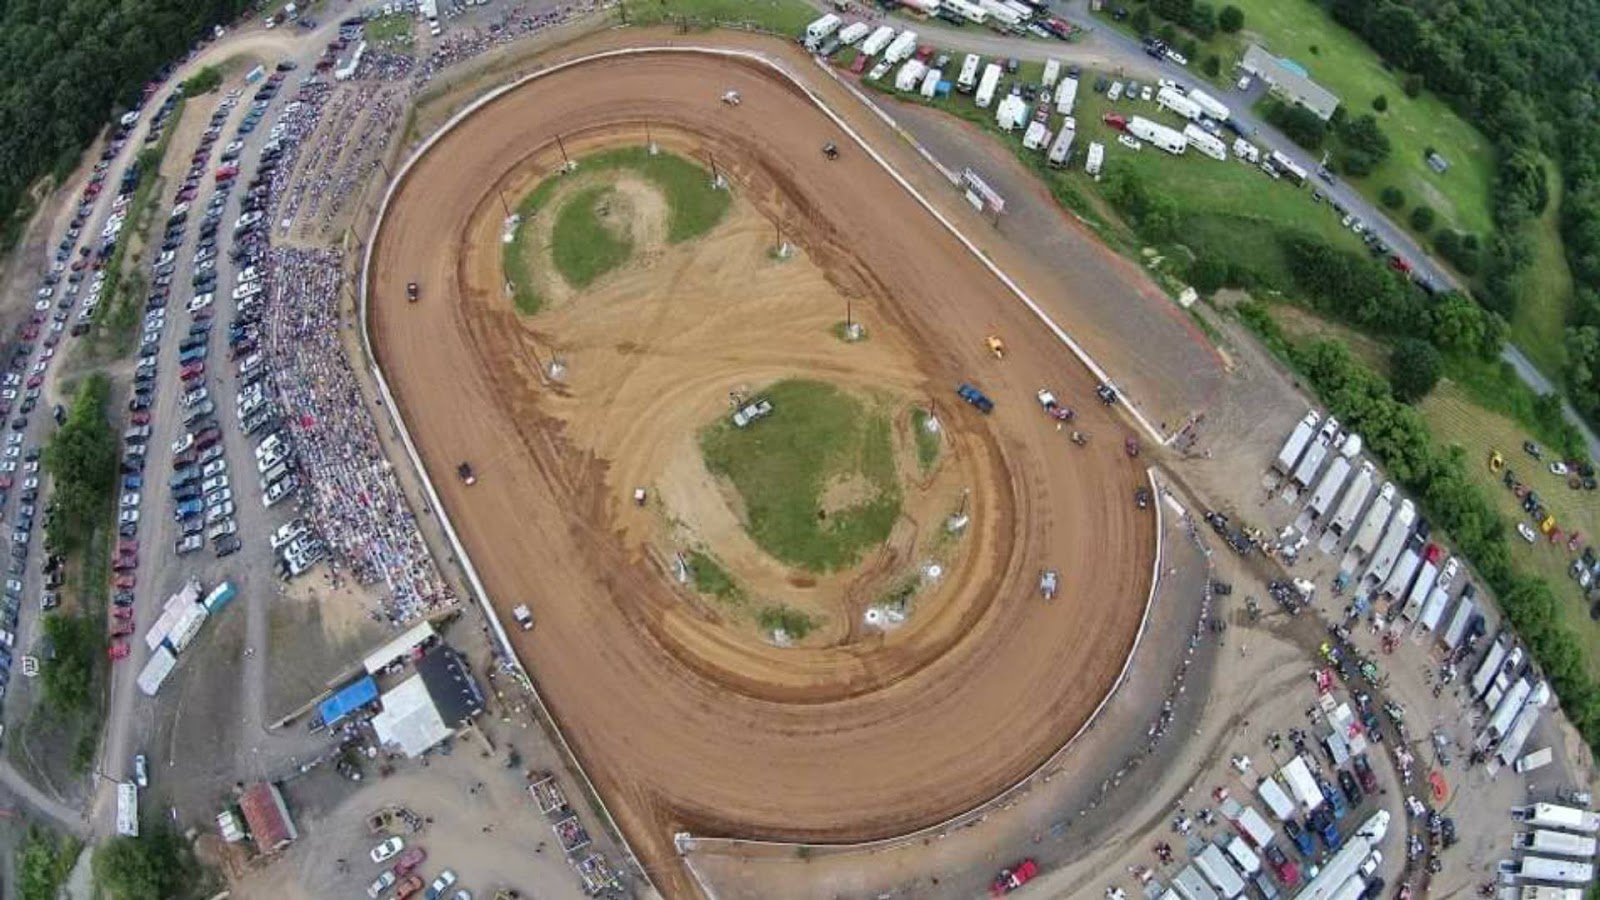 CENTRAL PA RACING SCENE: URC is going to PATH VALLEY ...